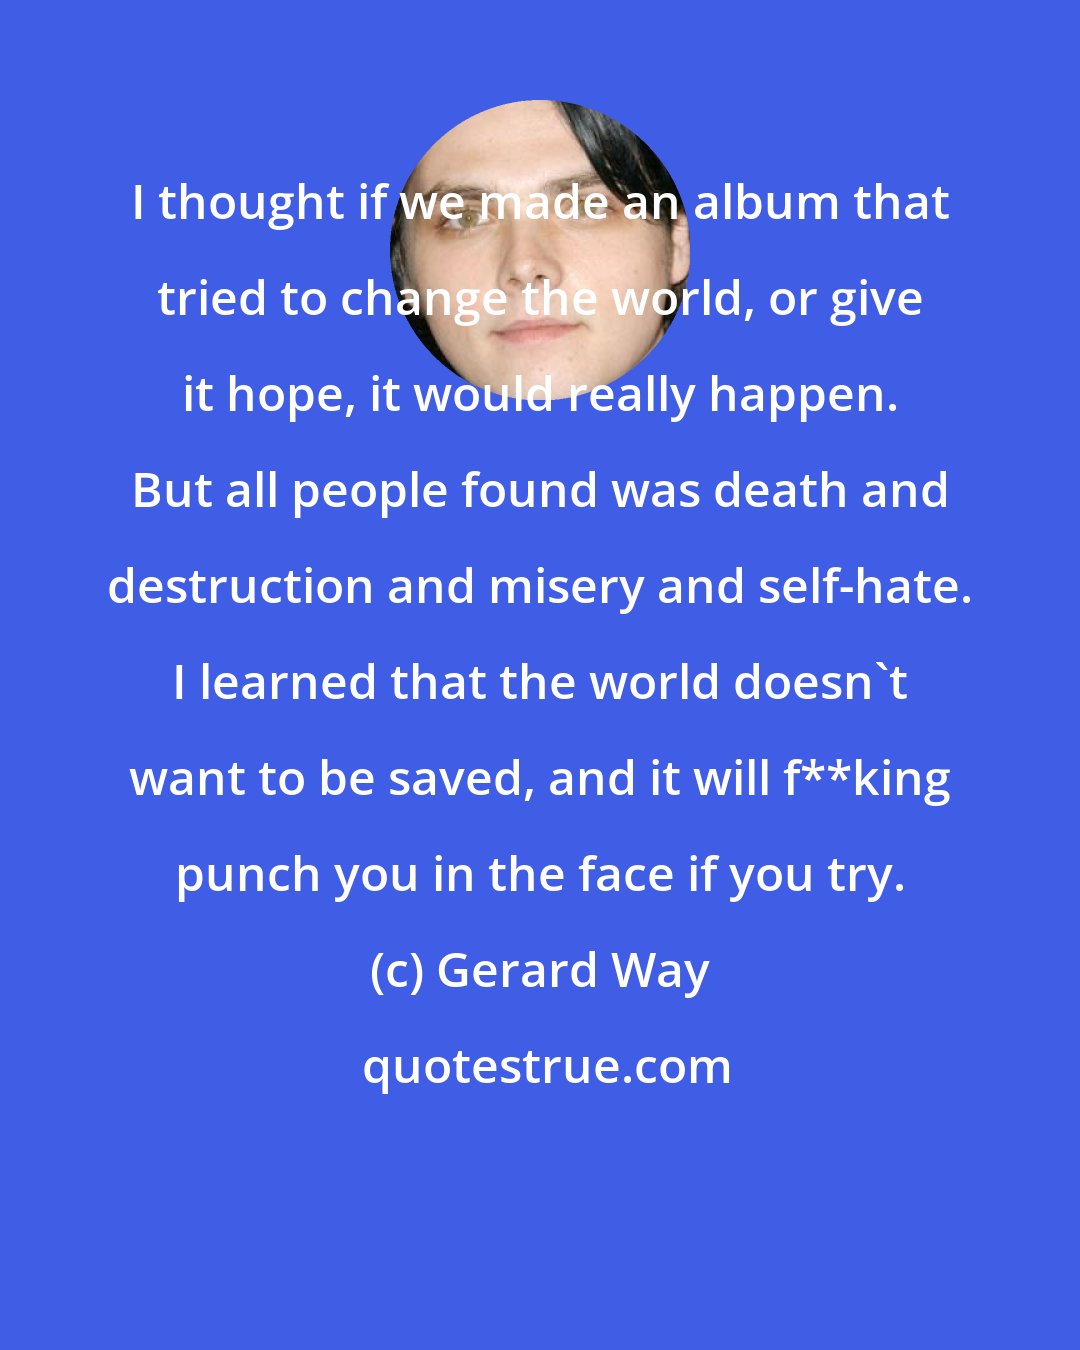 Gerard Way: I thought if we made an album that tried to change the world, or give it hope, it would really happen. But all people found was death and destruction and misery and self-hate. I learned that the world doesn't want to be saved, and it will f**king punch you in the face if you try.